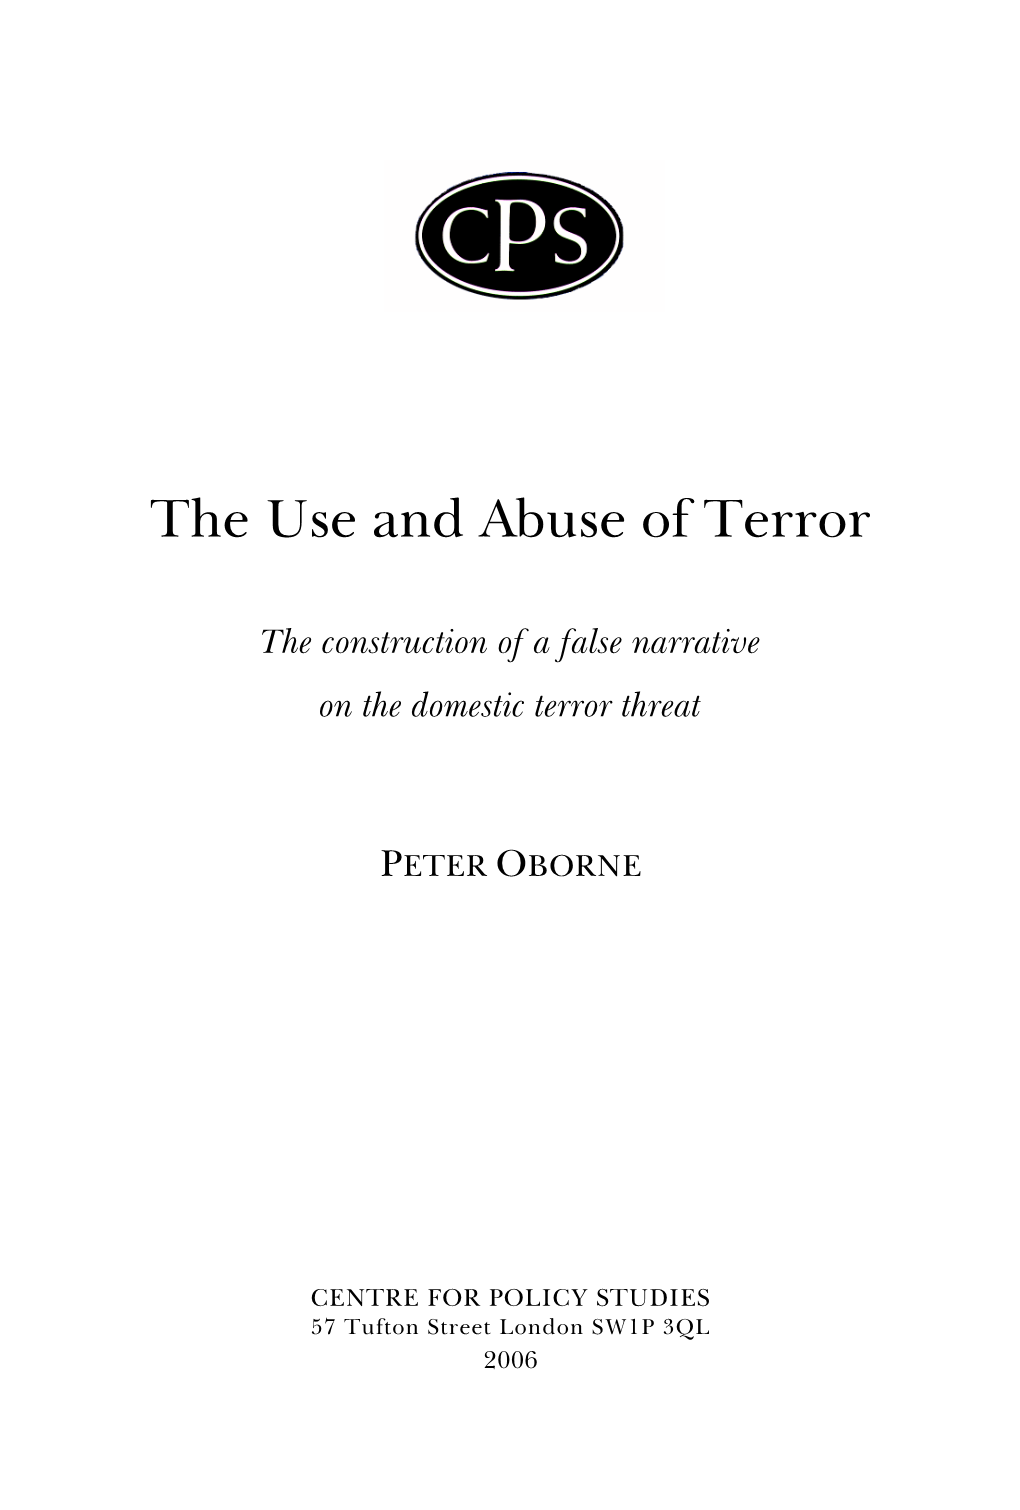 The Use and Abuse of Terror